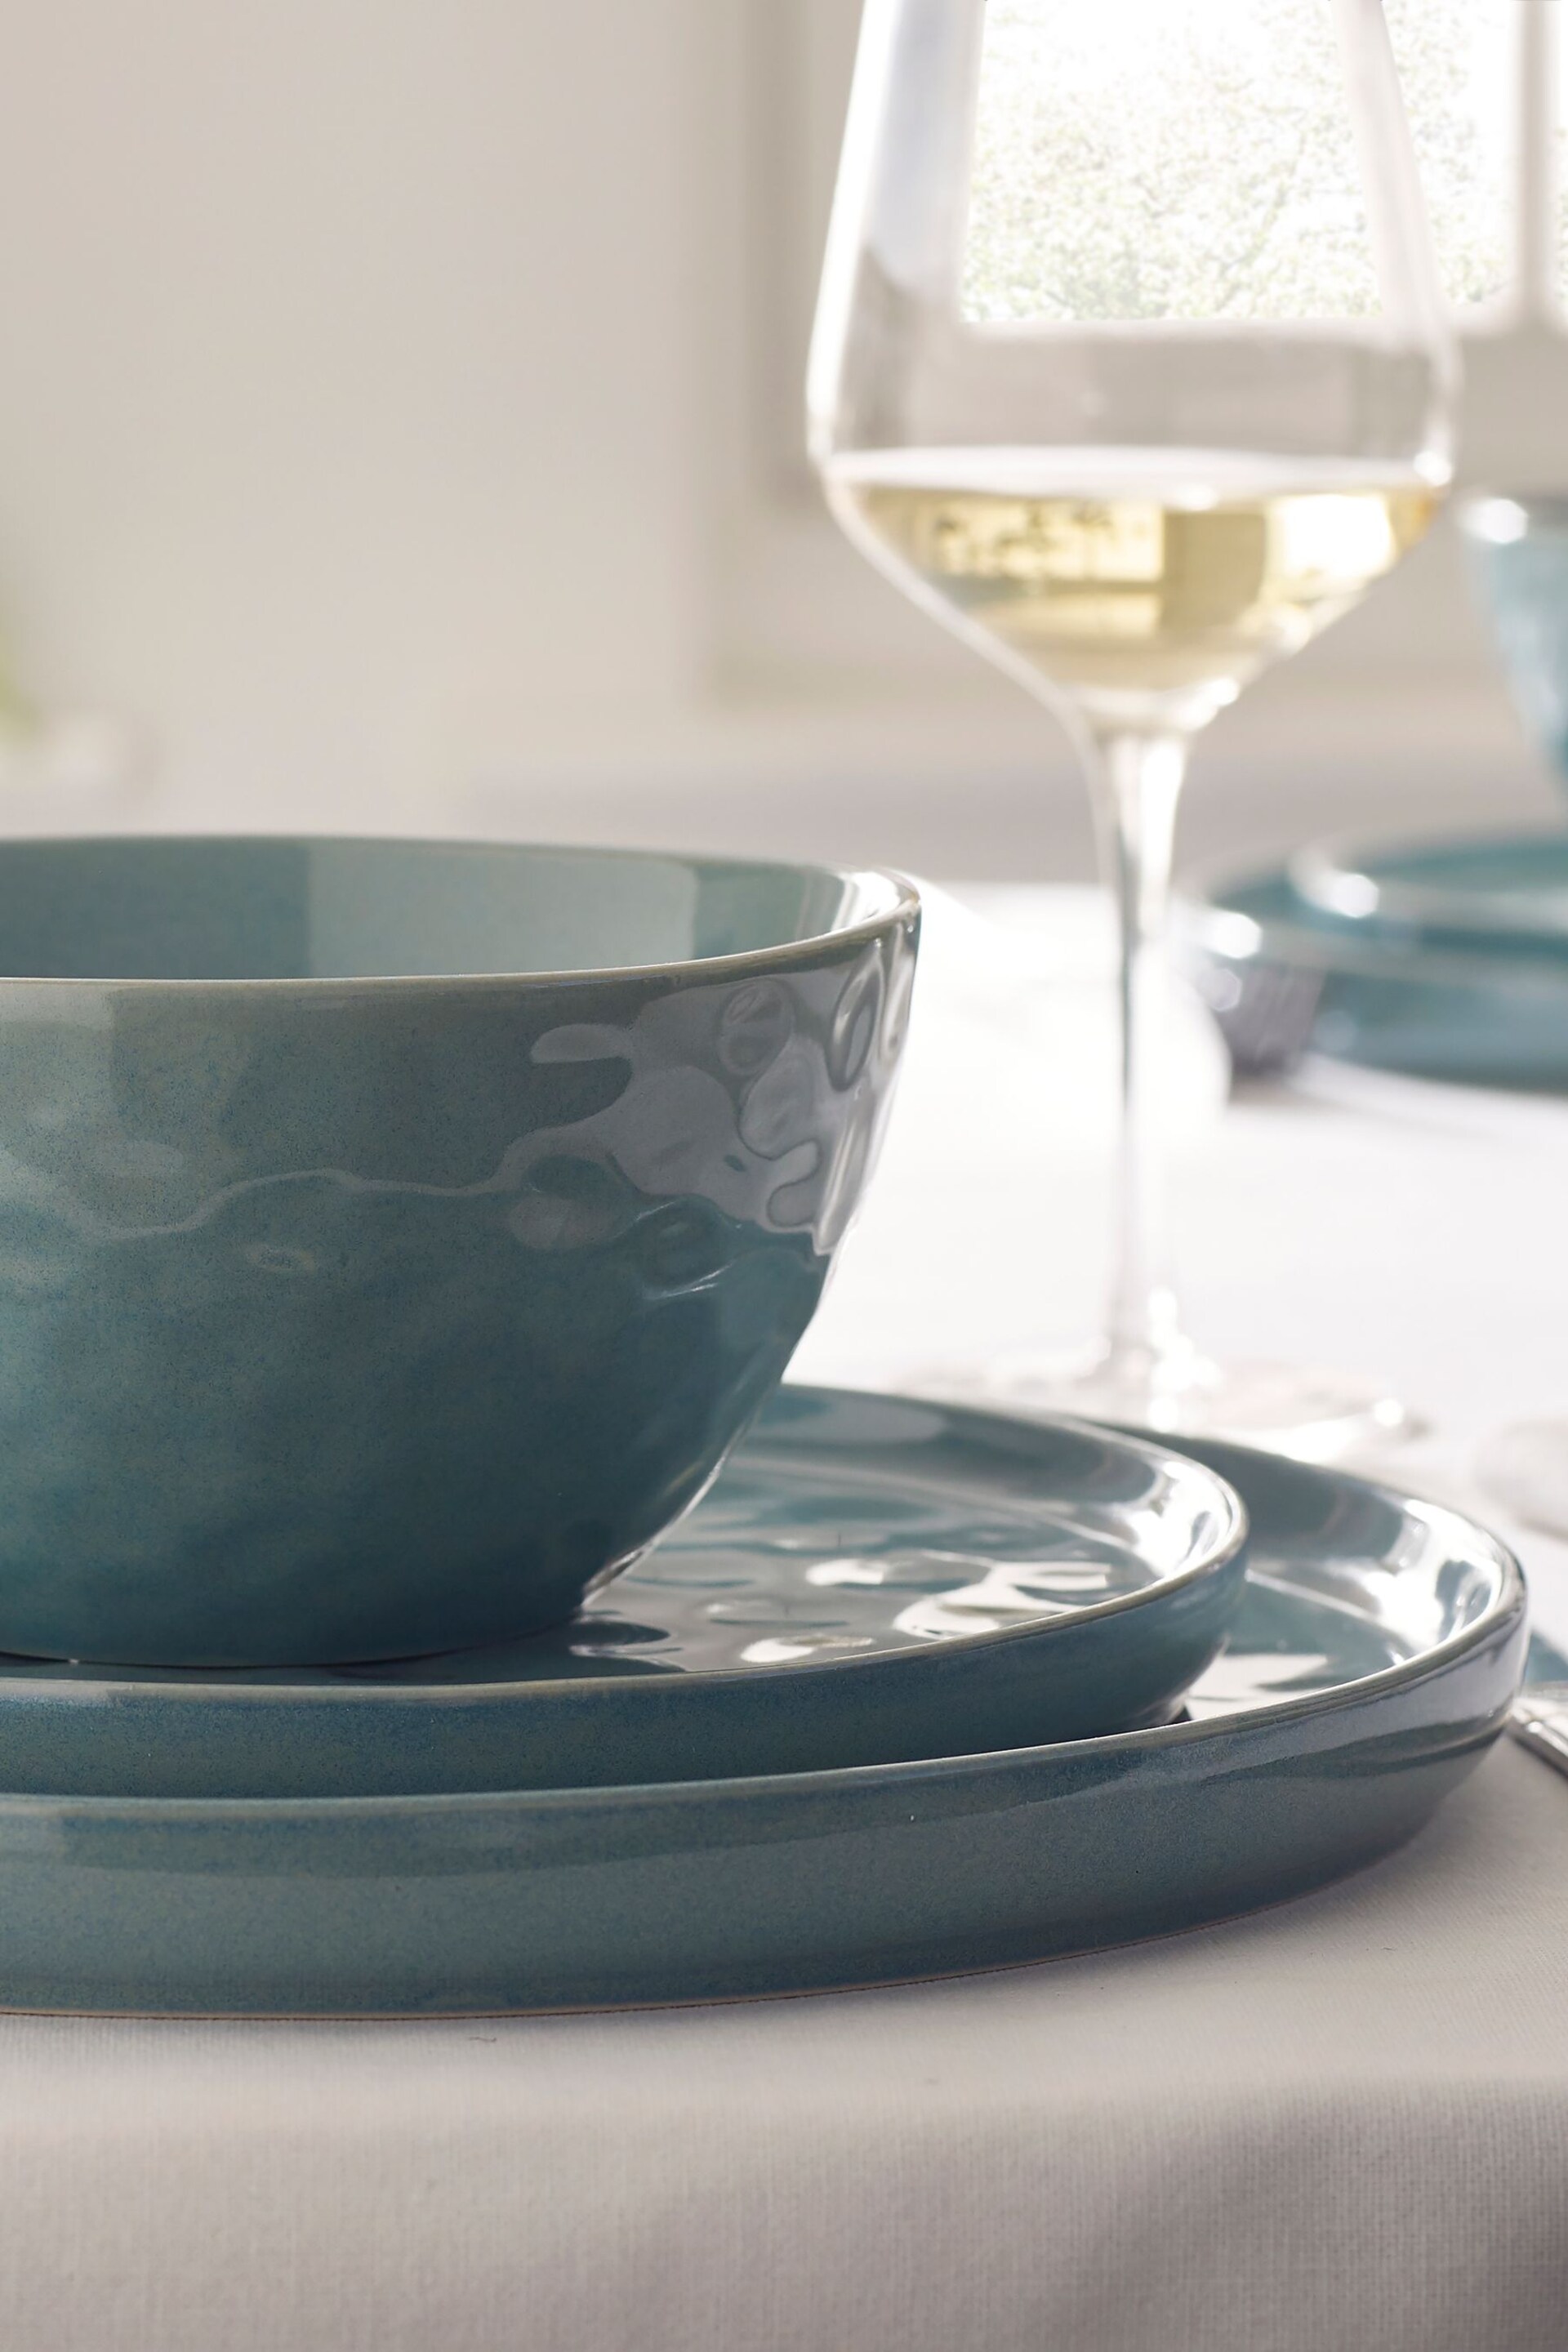 Teal Blue Willow 12 Piece Dinner Set - Image 3 of 3